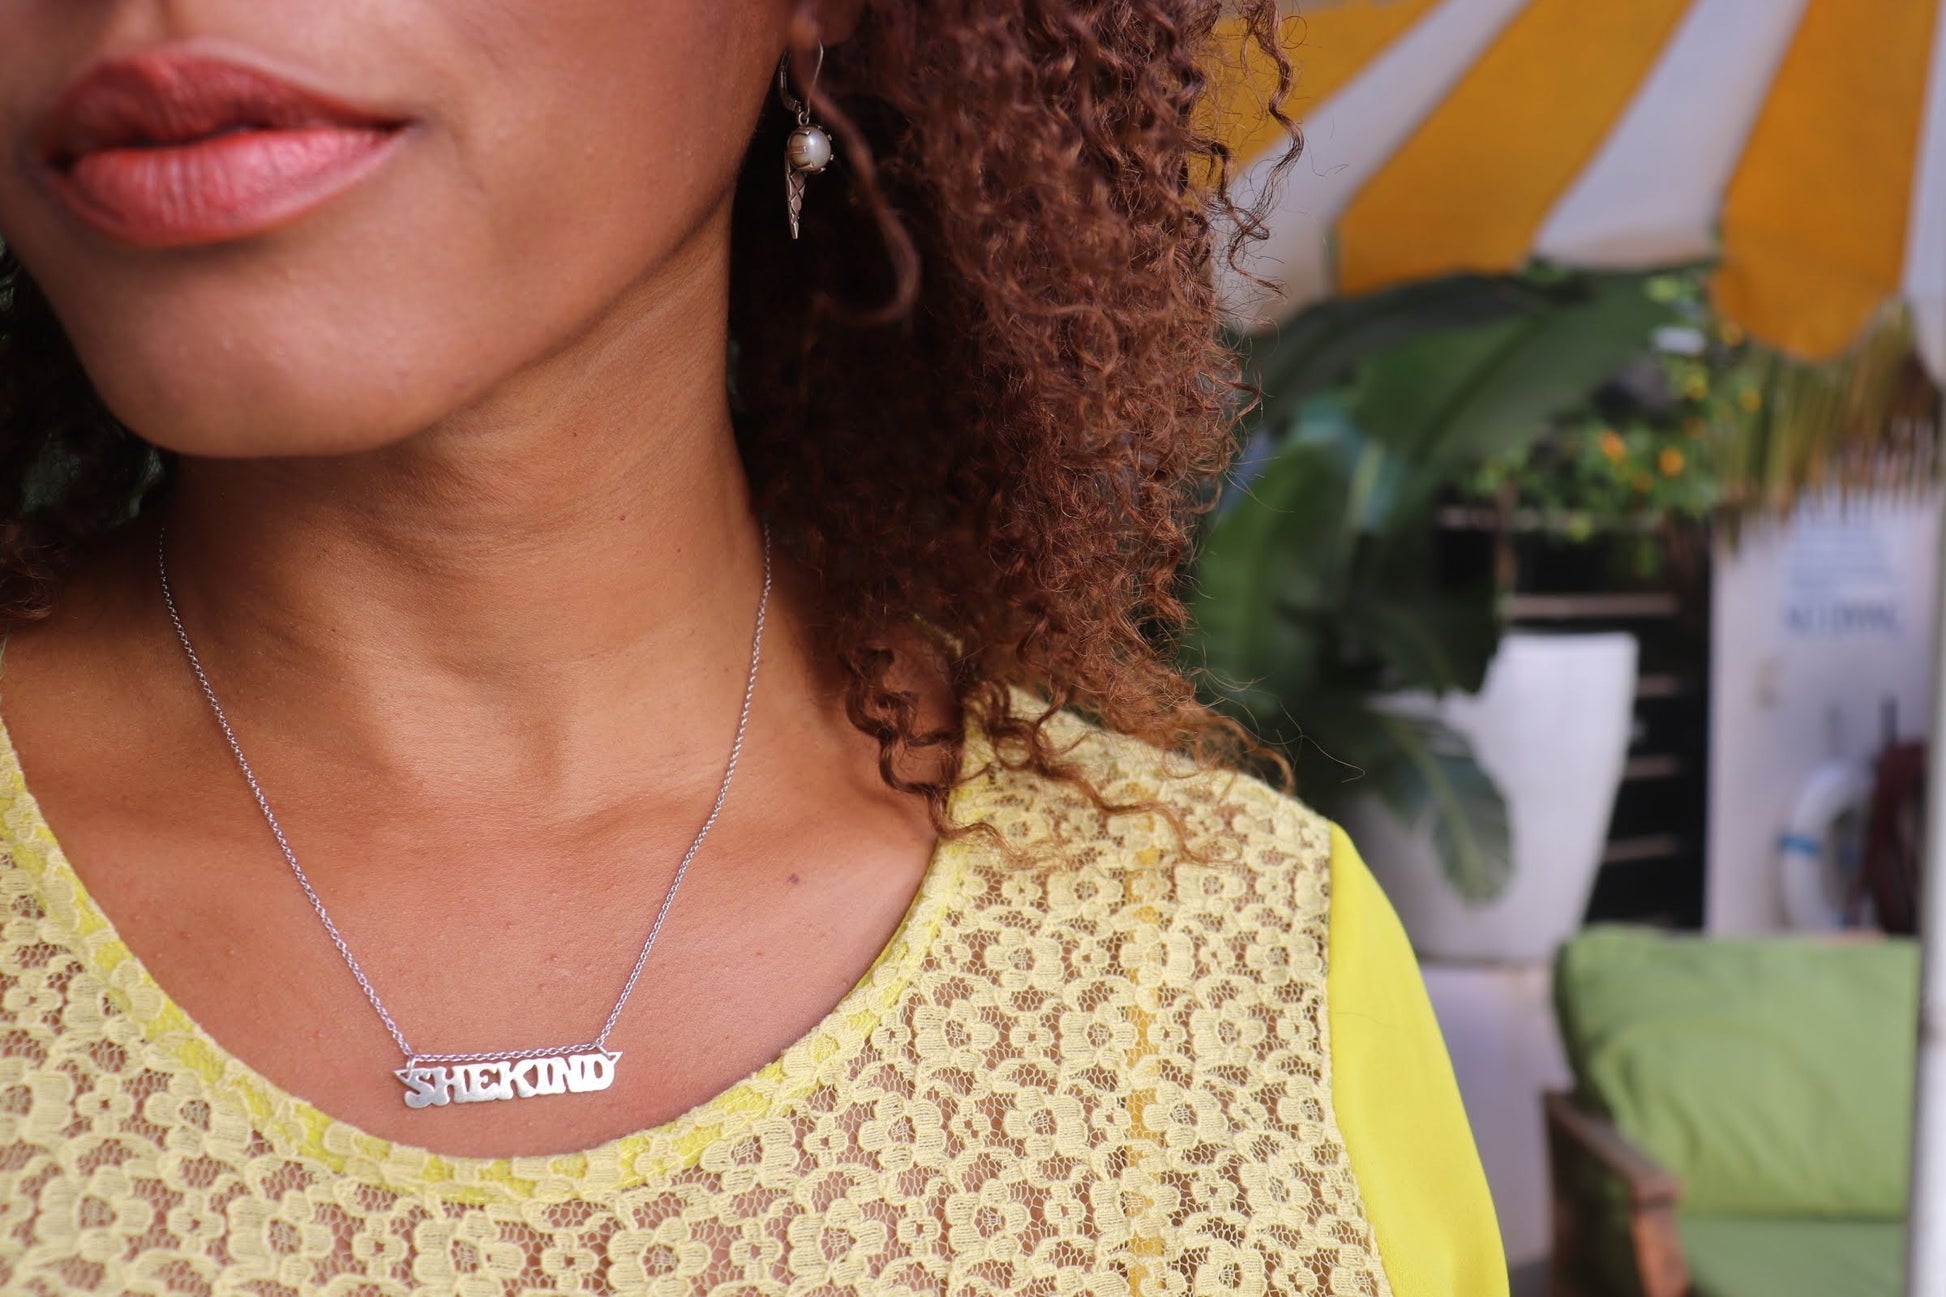 black woman with curly hair in yellow dress at pool wearing  a nameplate necklace that says shekind 